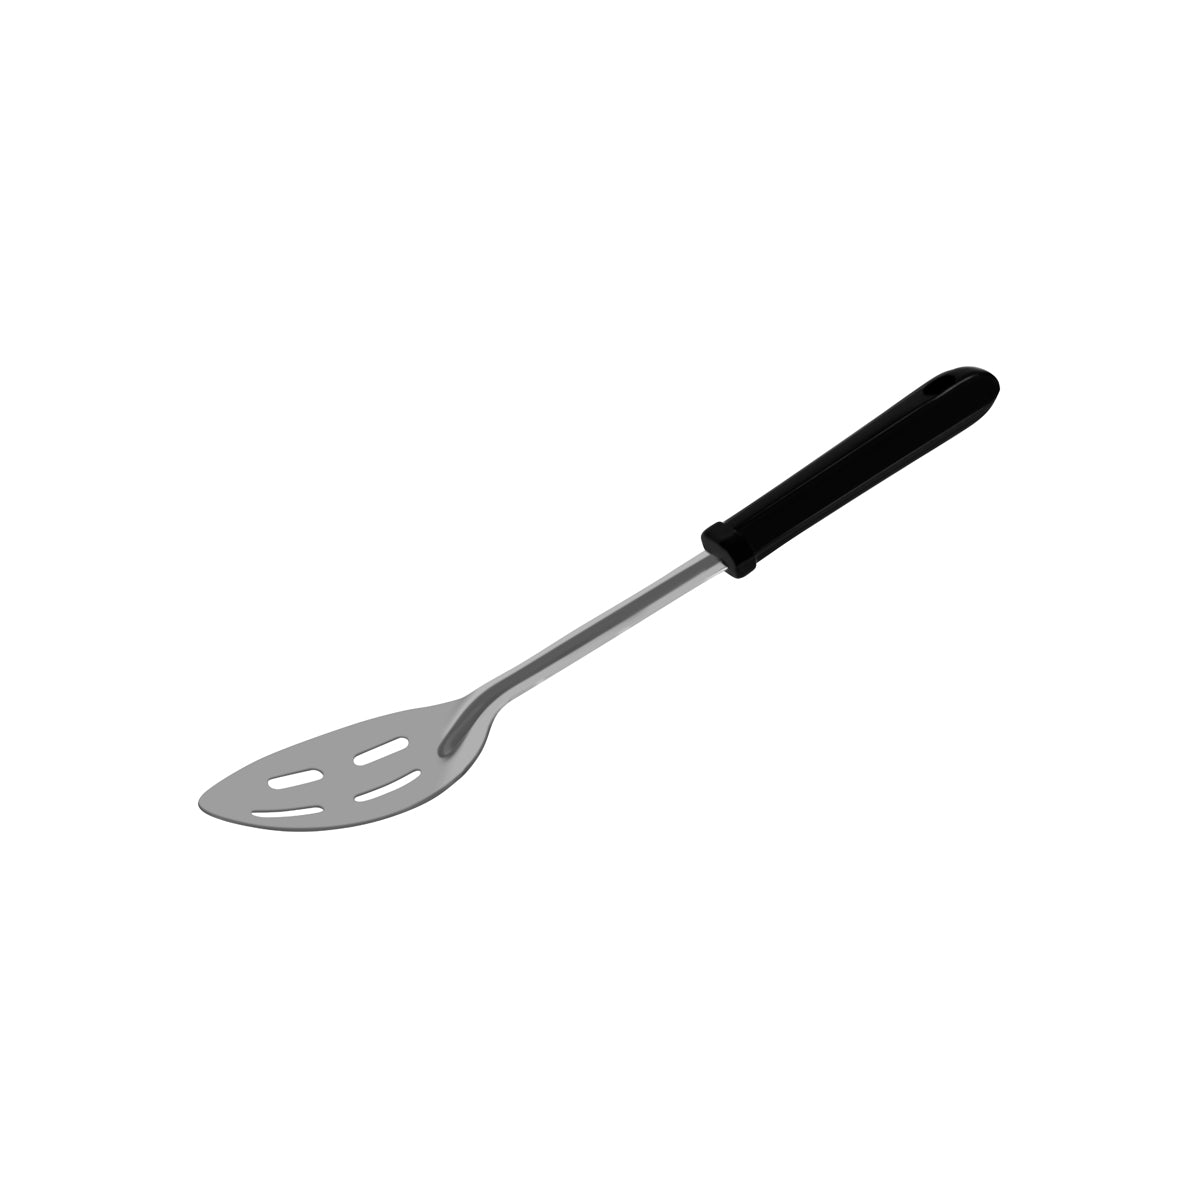 36133 Chef Inox Spoon Basting Slotted with Polypropylene Handle 330mm Tomkin Australia Hospitality Supplies